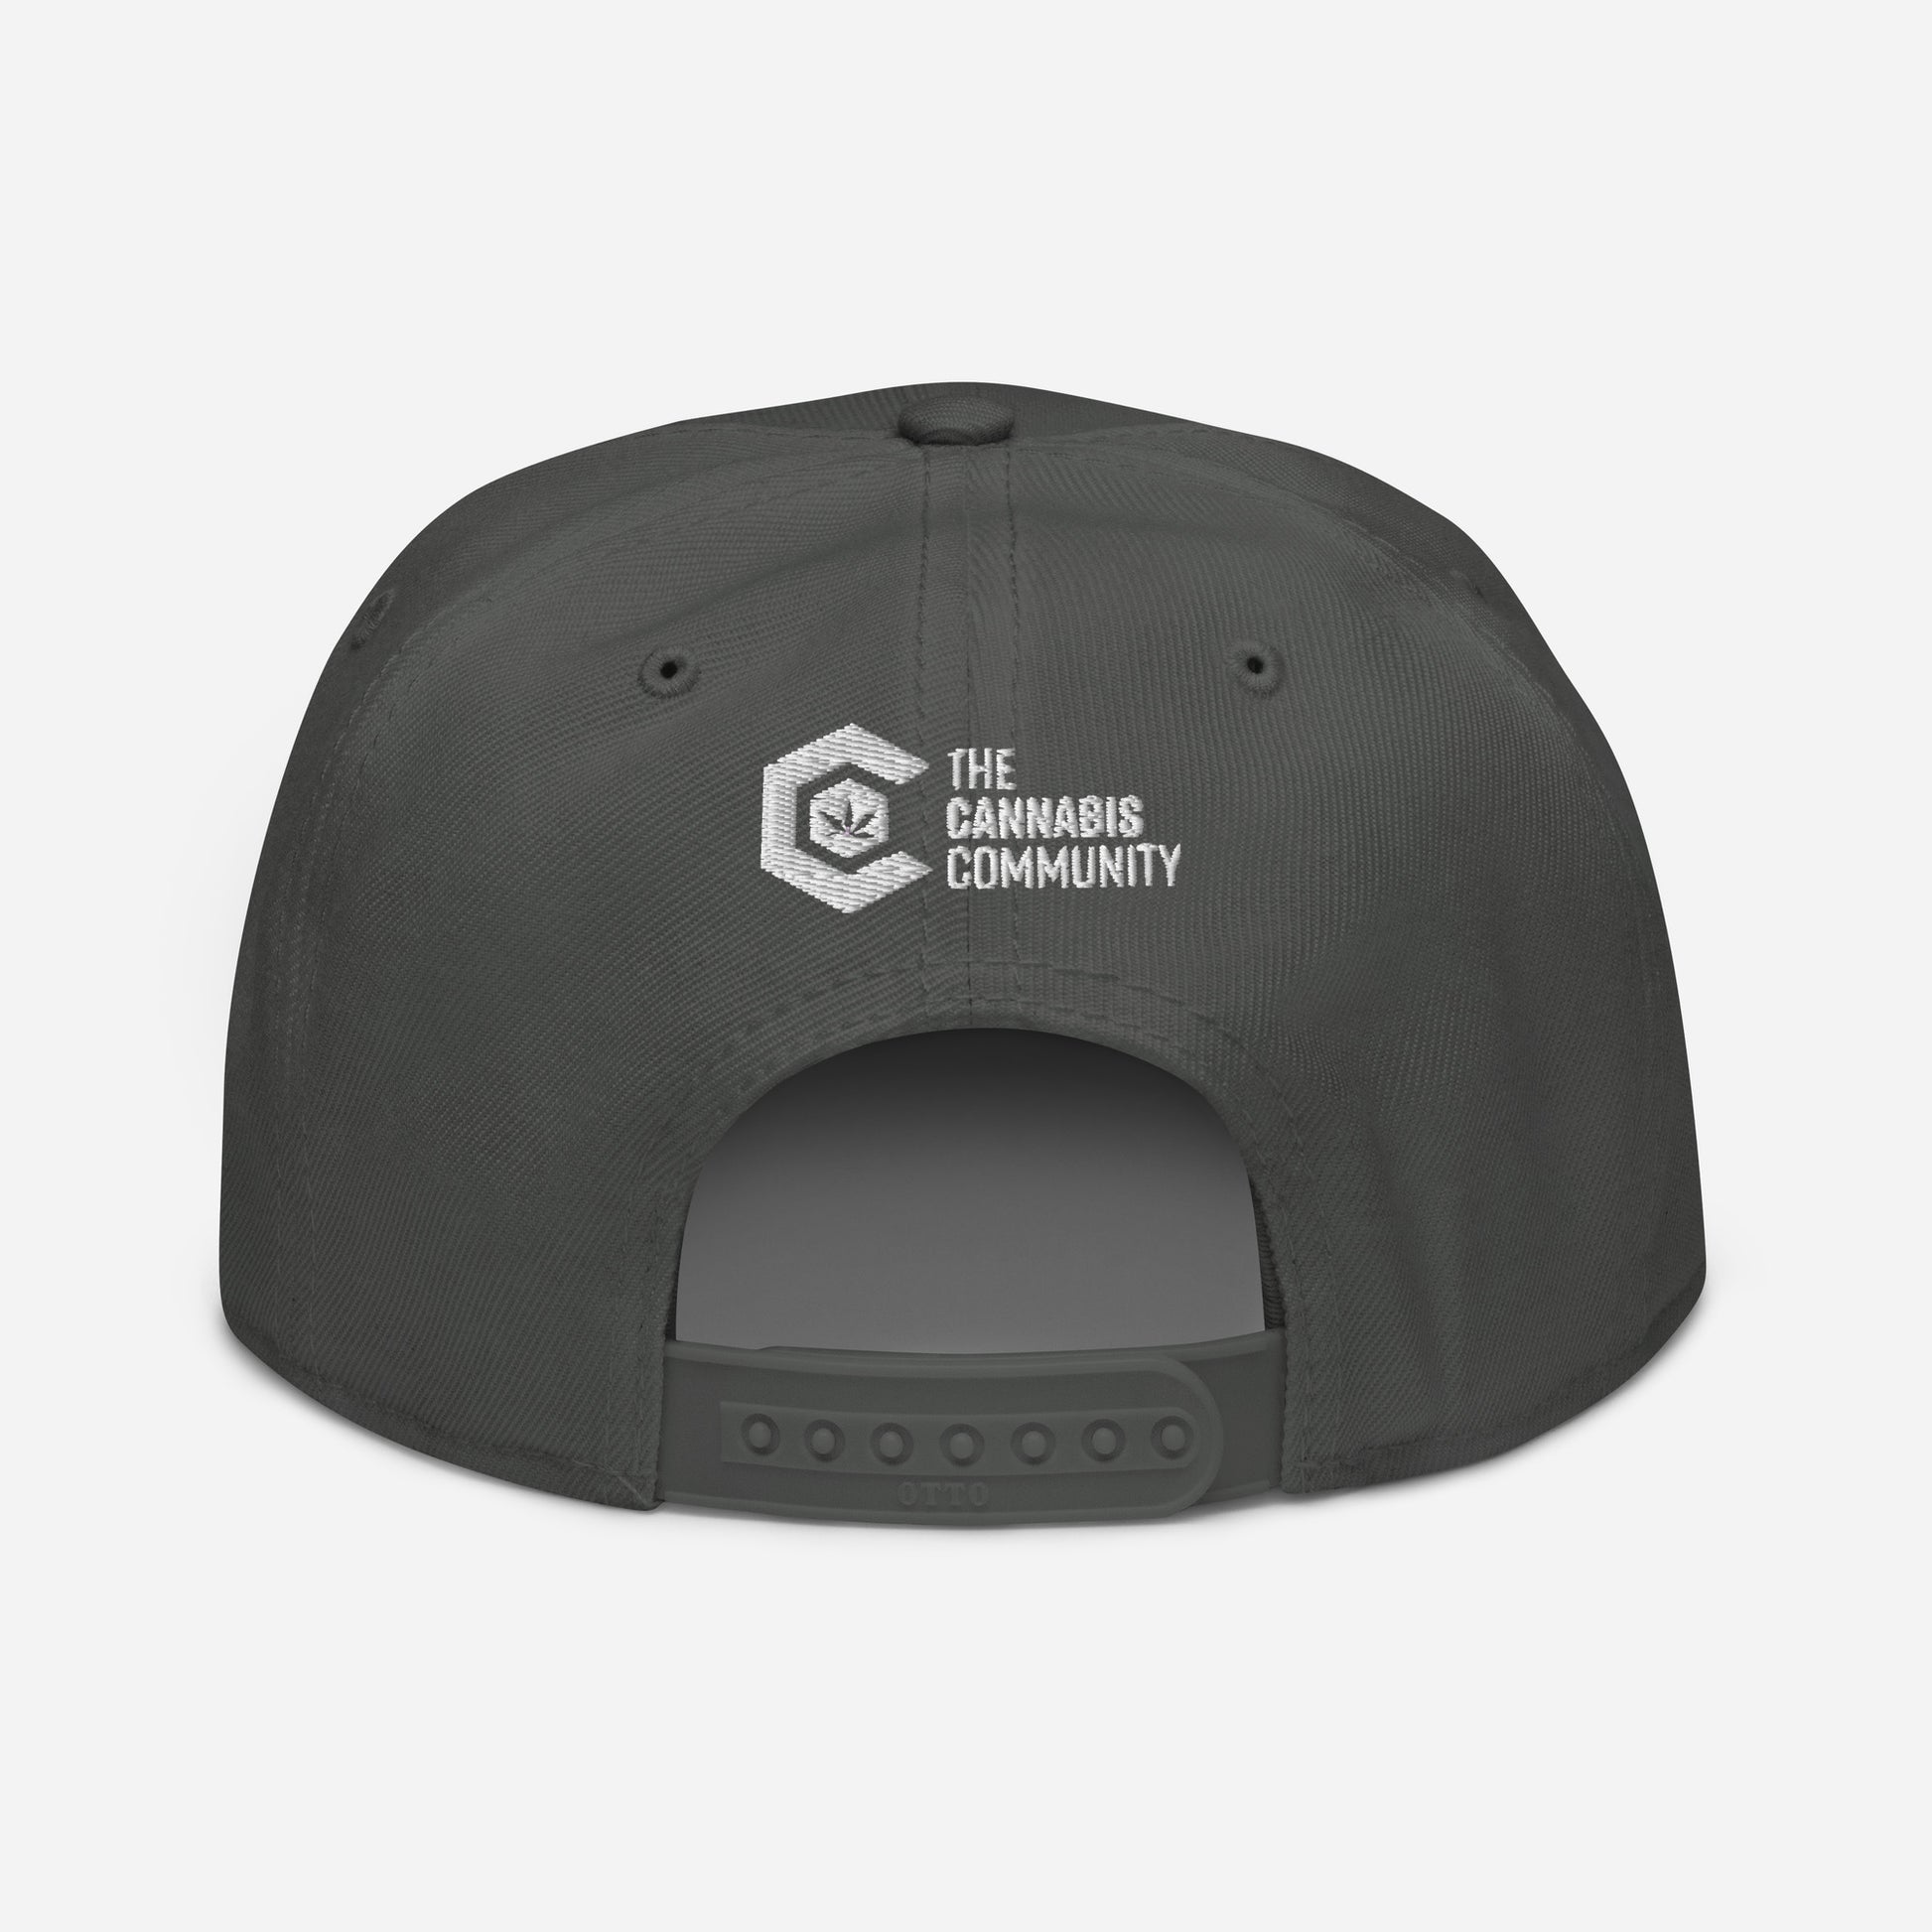 Golden Goat Cannabis Snapback Hat with "the cannabis community" logo embroidered in white on the front, adjustable snapback closure visible.